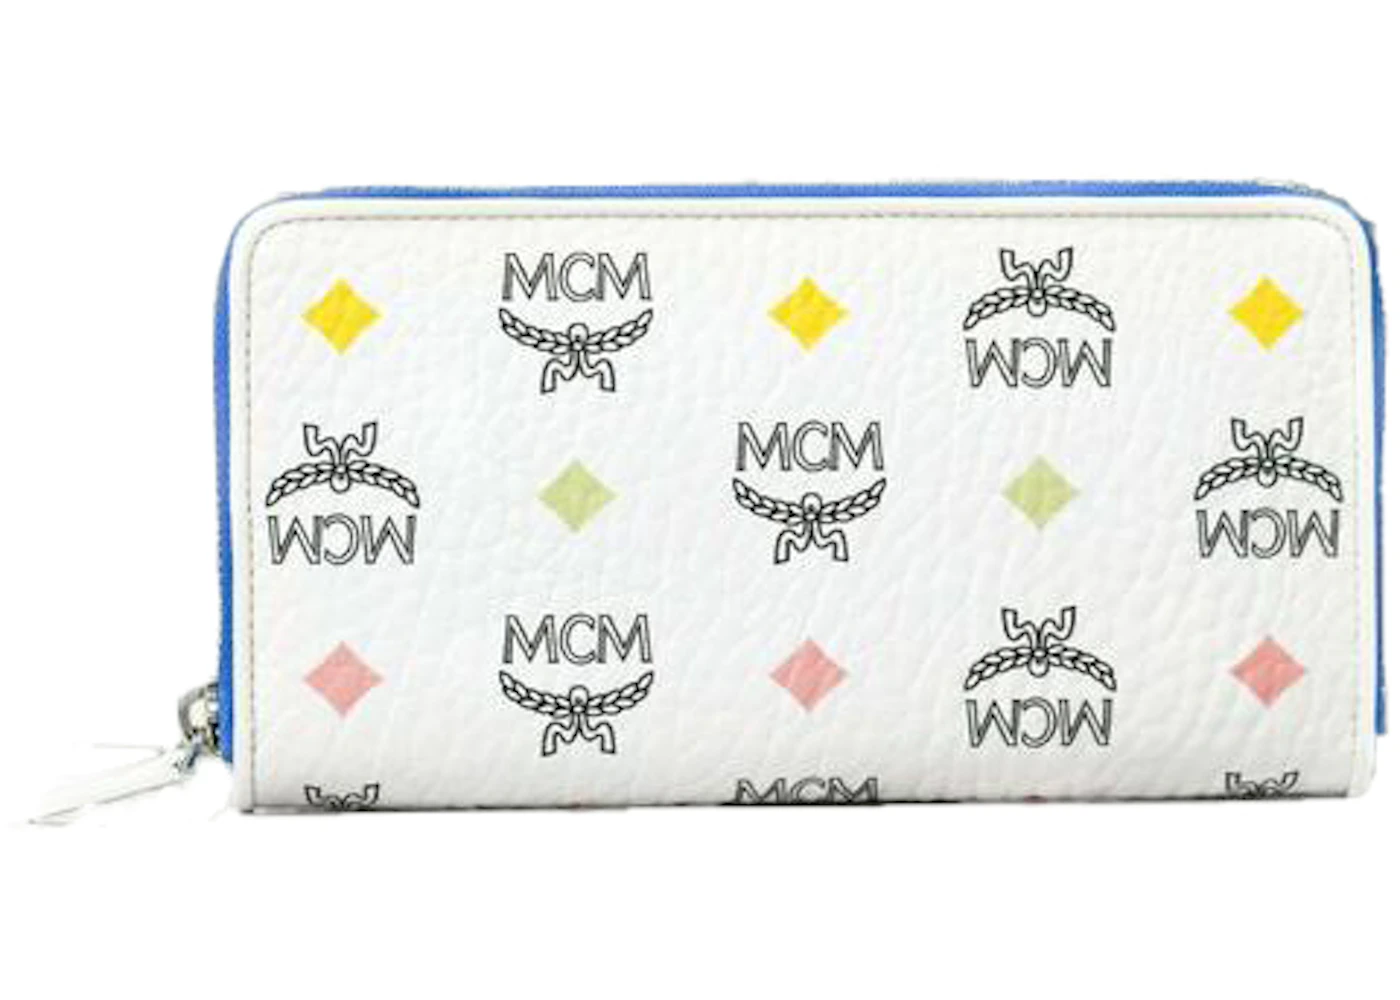 MCM Spectrum Diamond Visetos Wallet Clutch Large White in Leather with ...